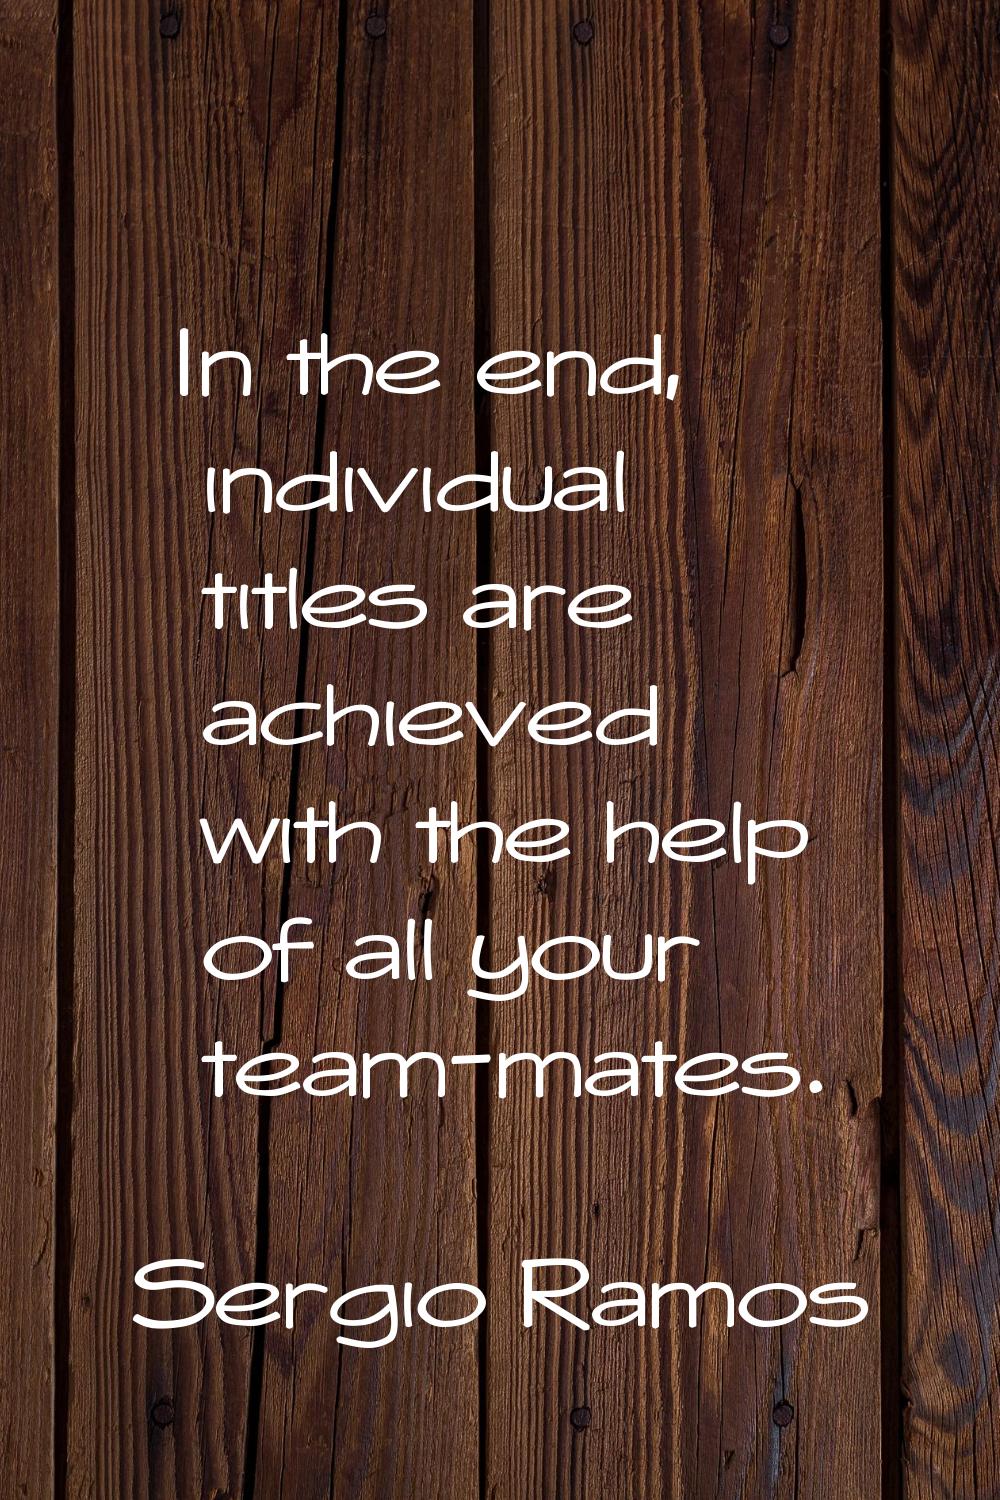 In the end, individual titles are achieved with the help of all your team-mates.